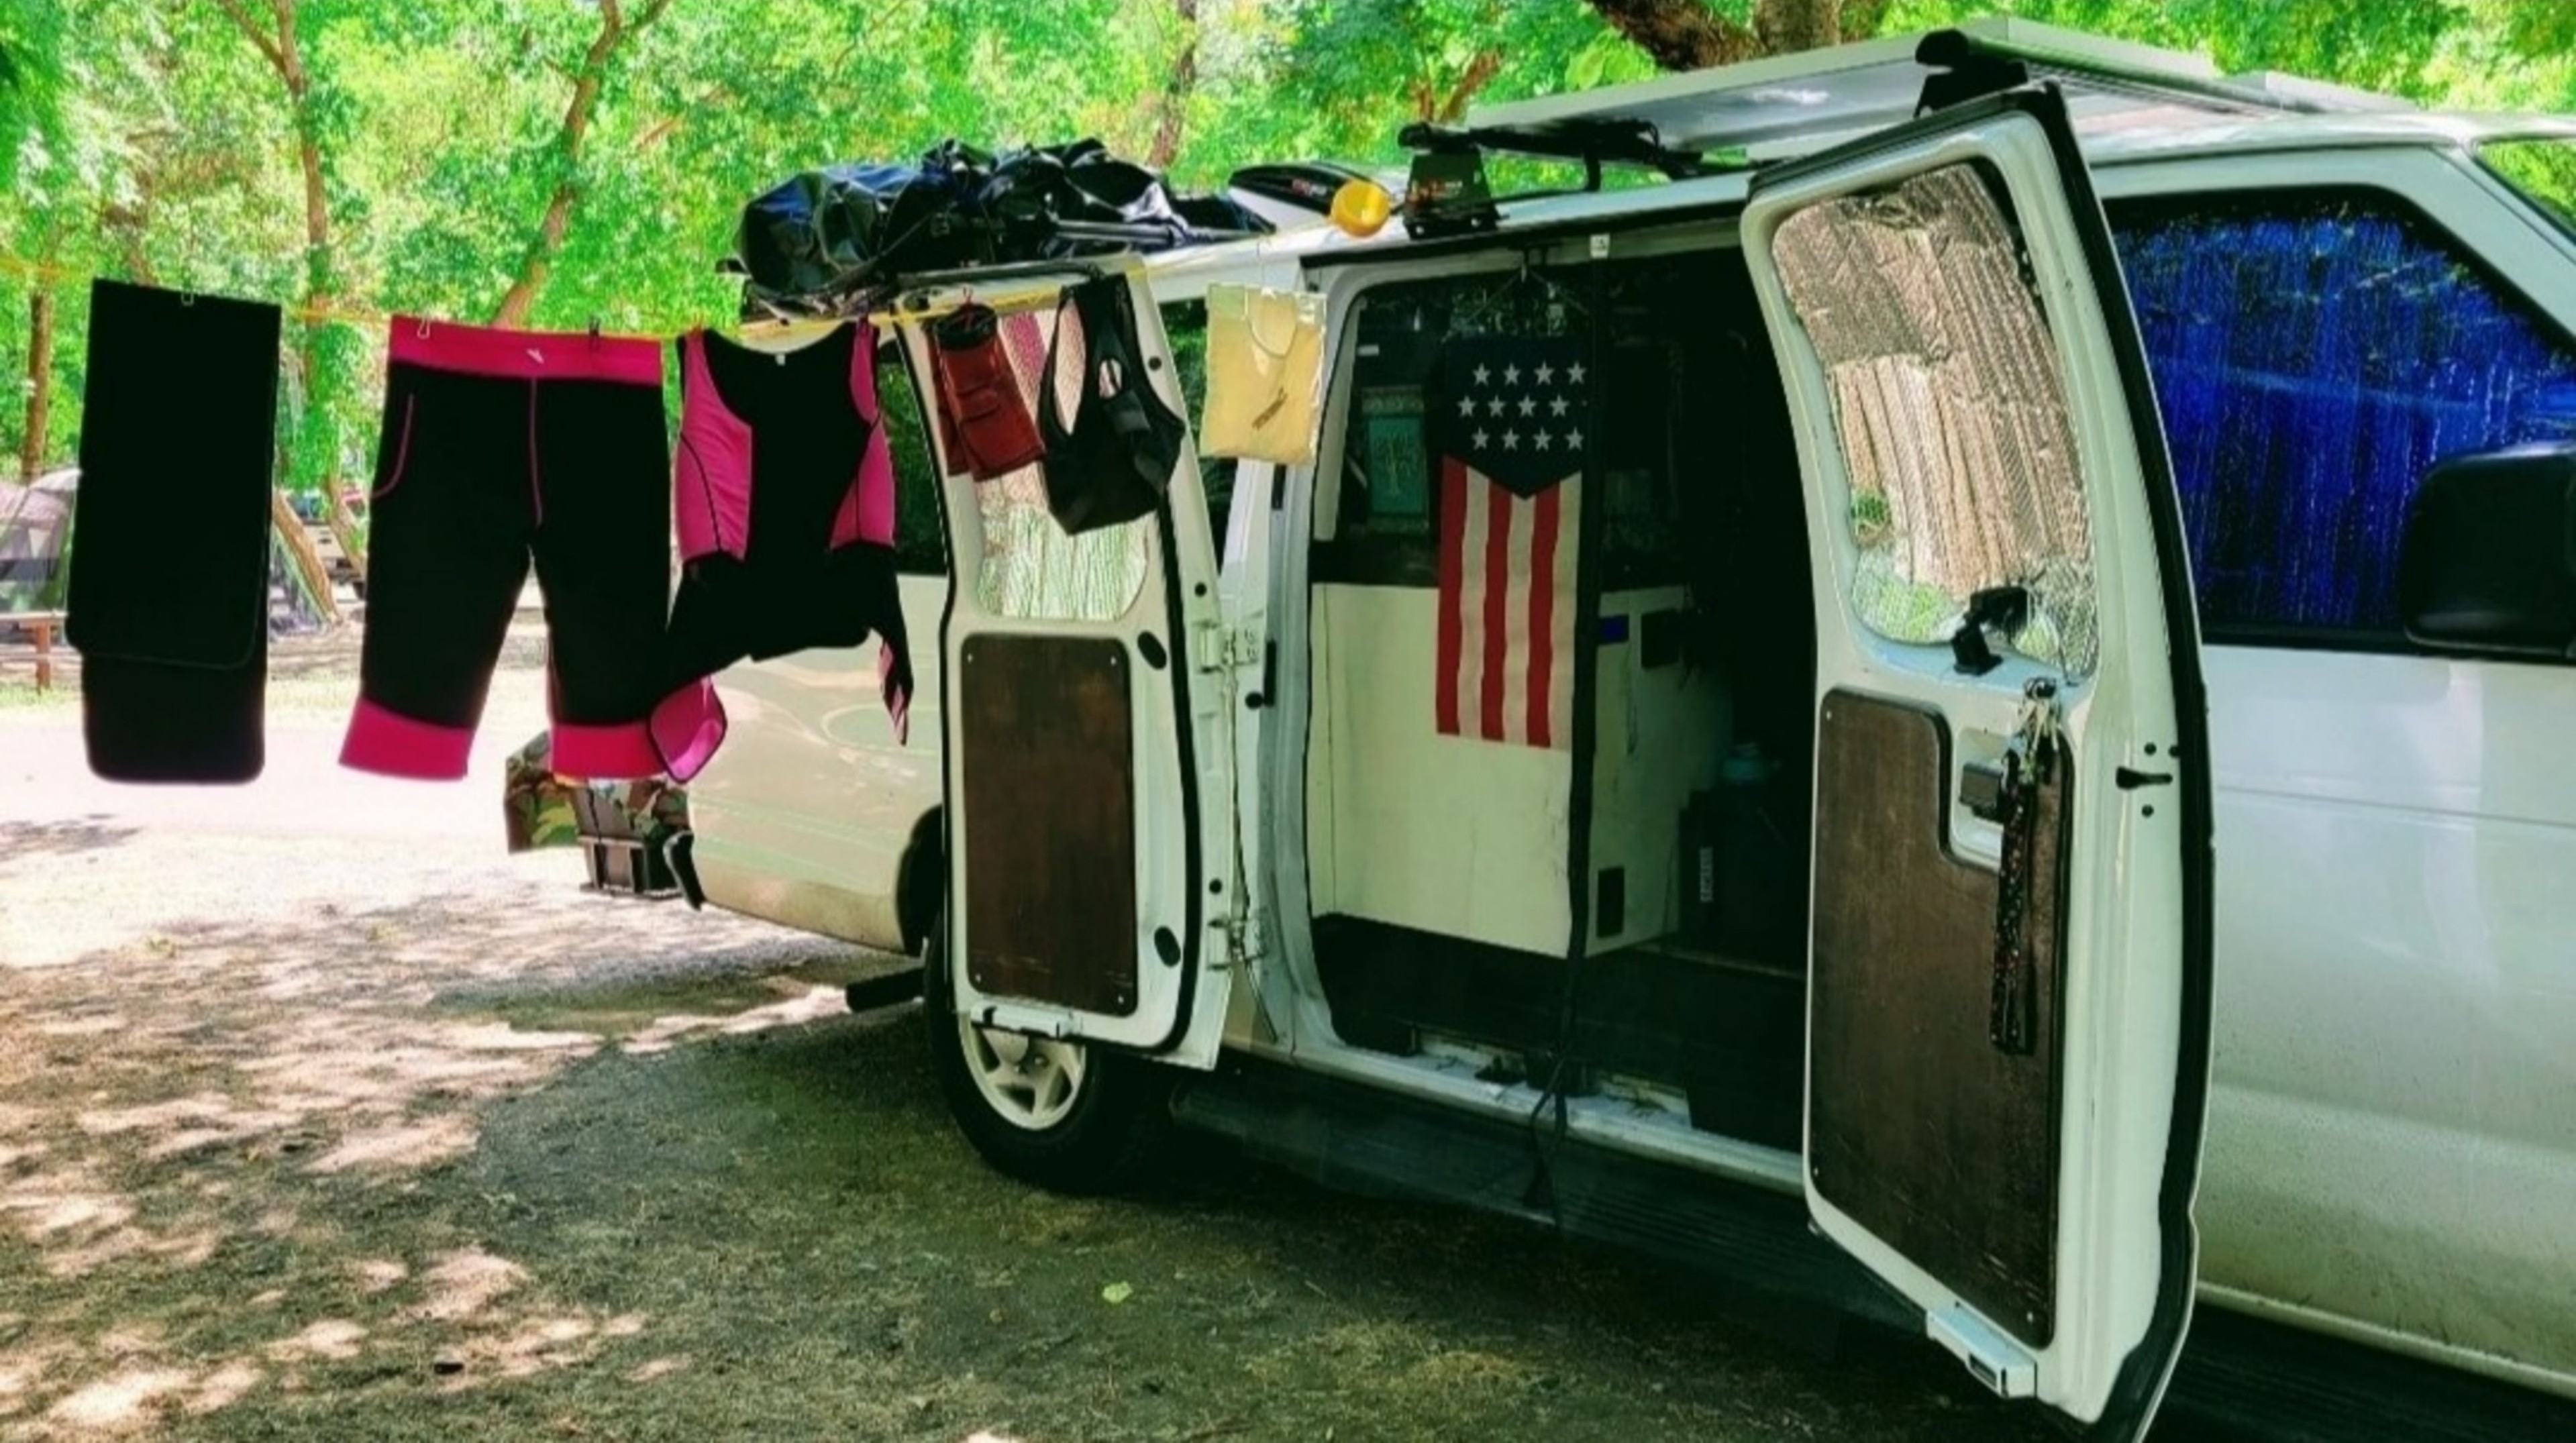 drying laundry while camping